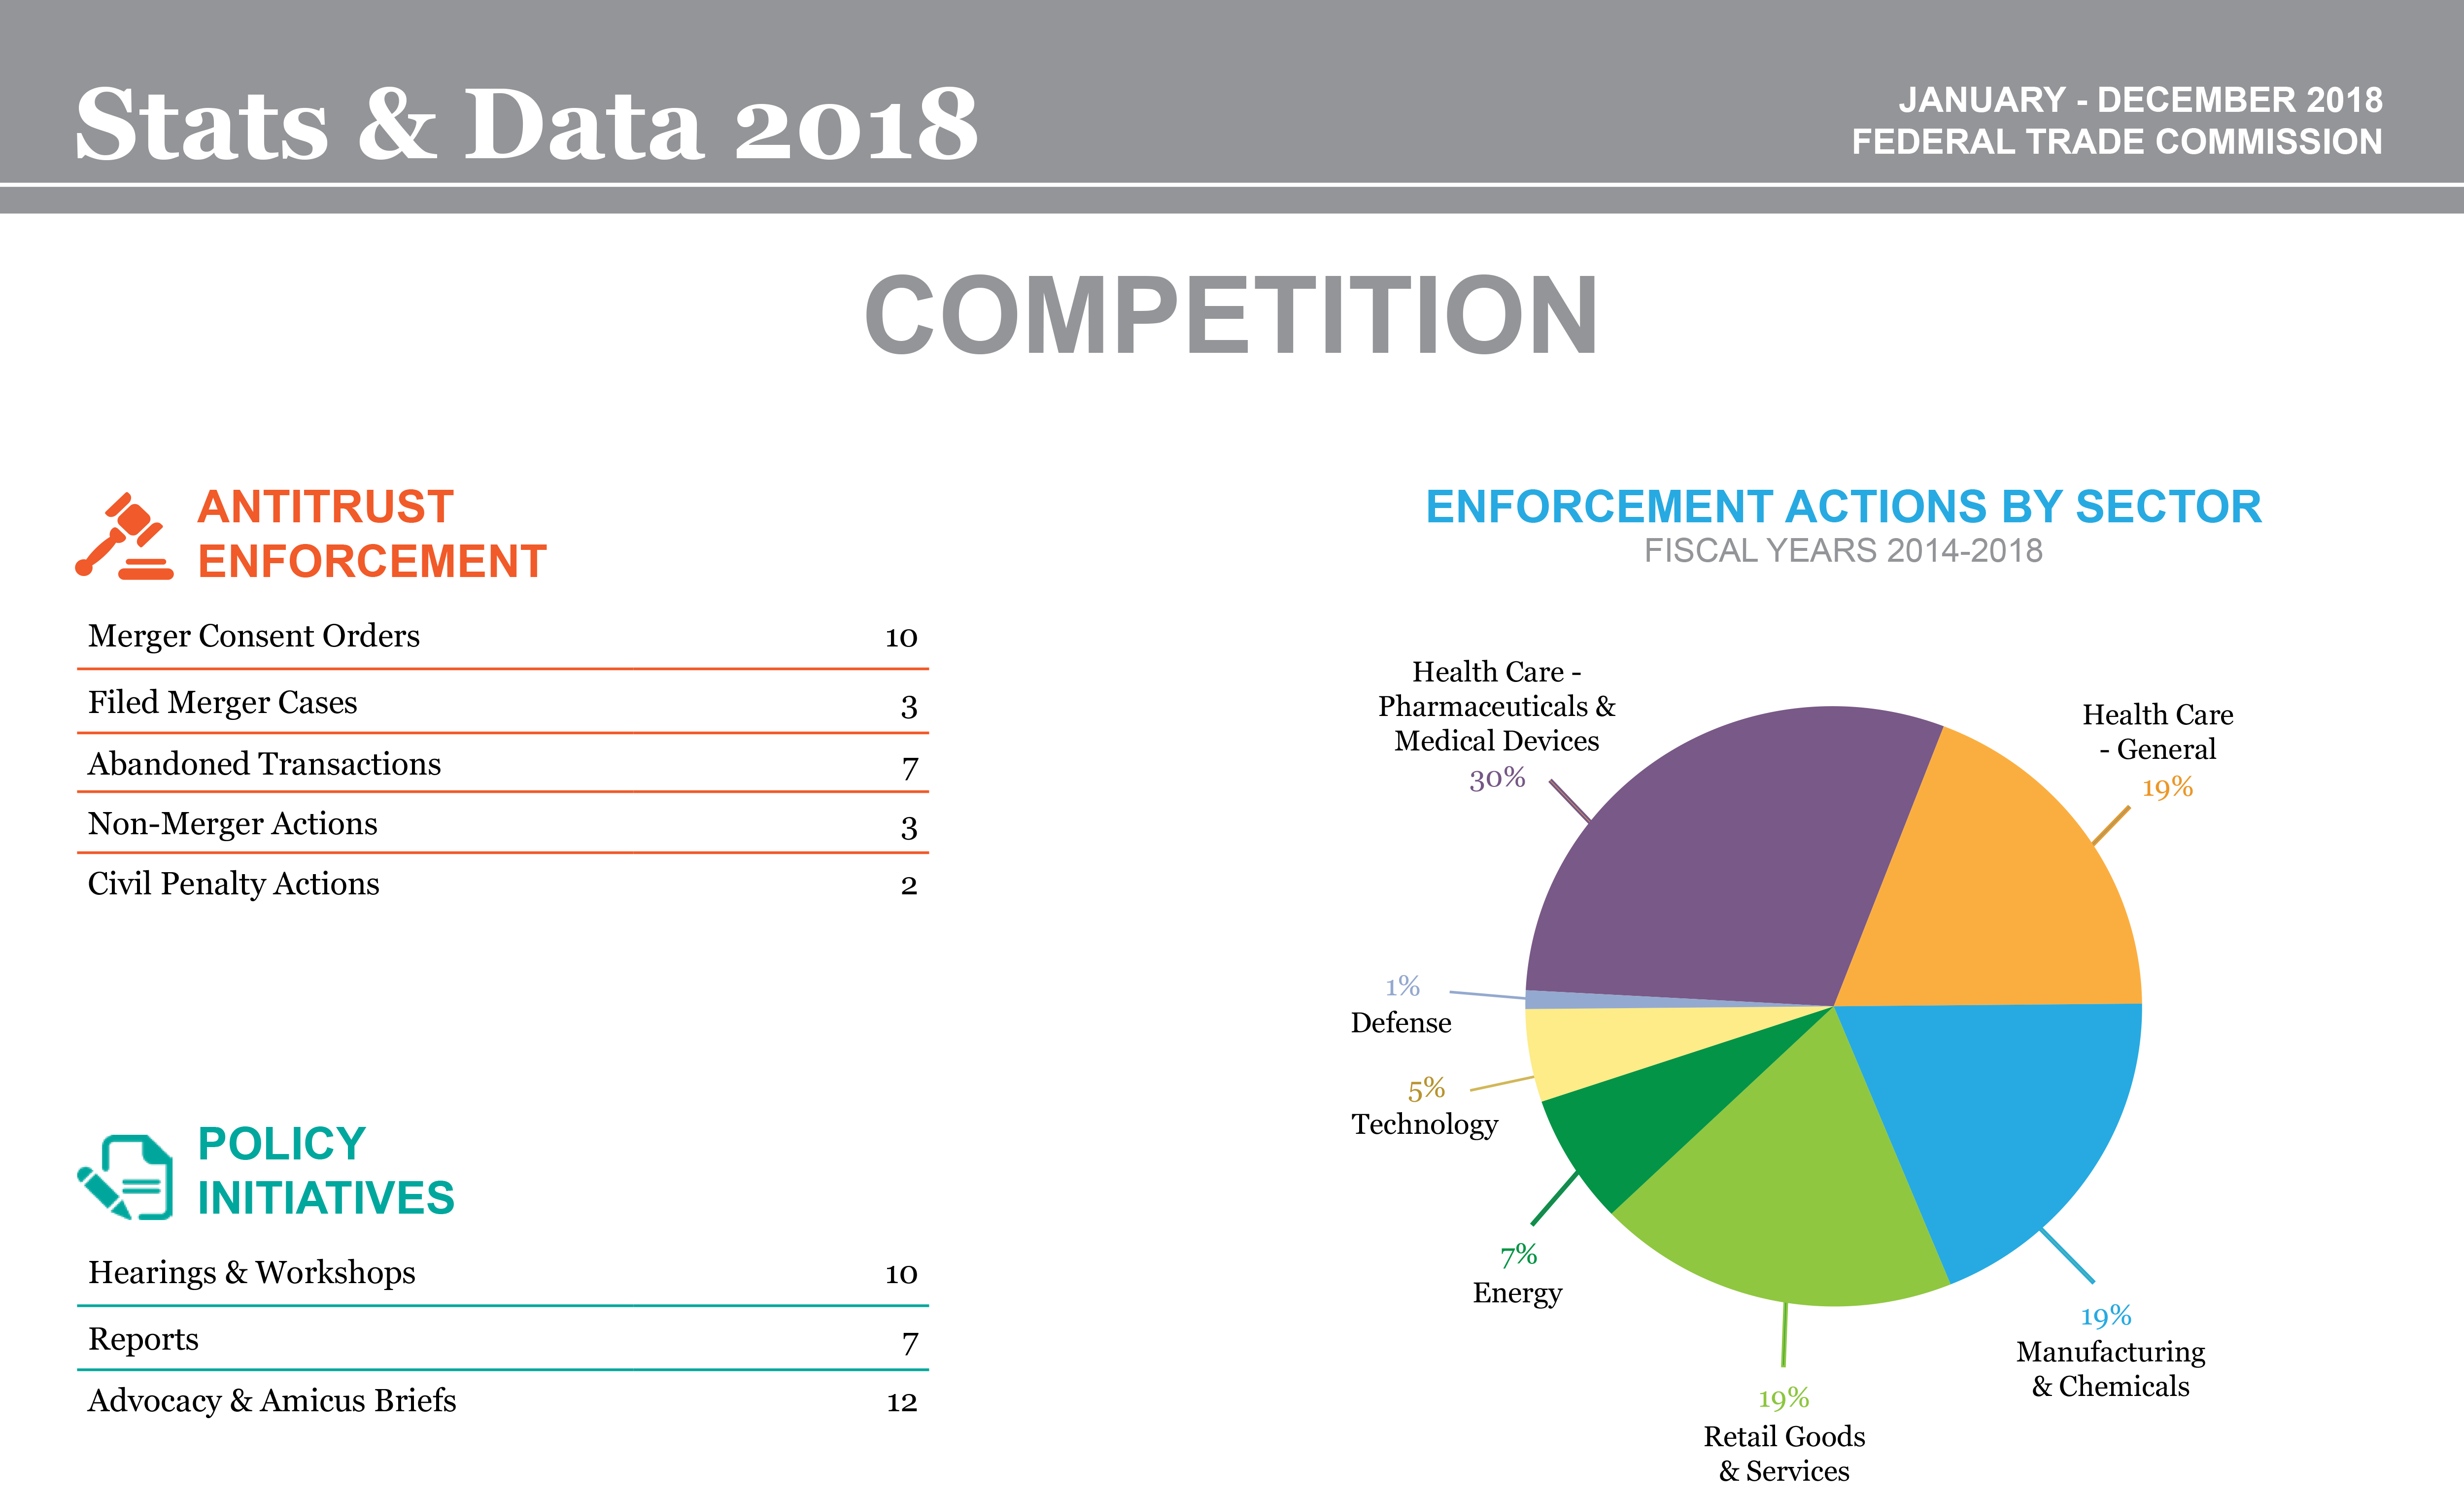 Stats & Data 2018 Competition infographic